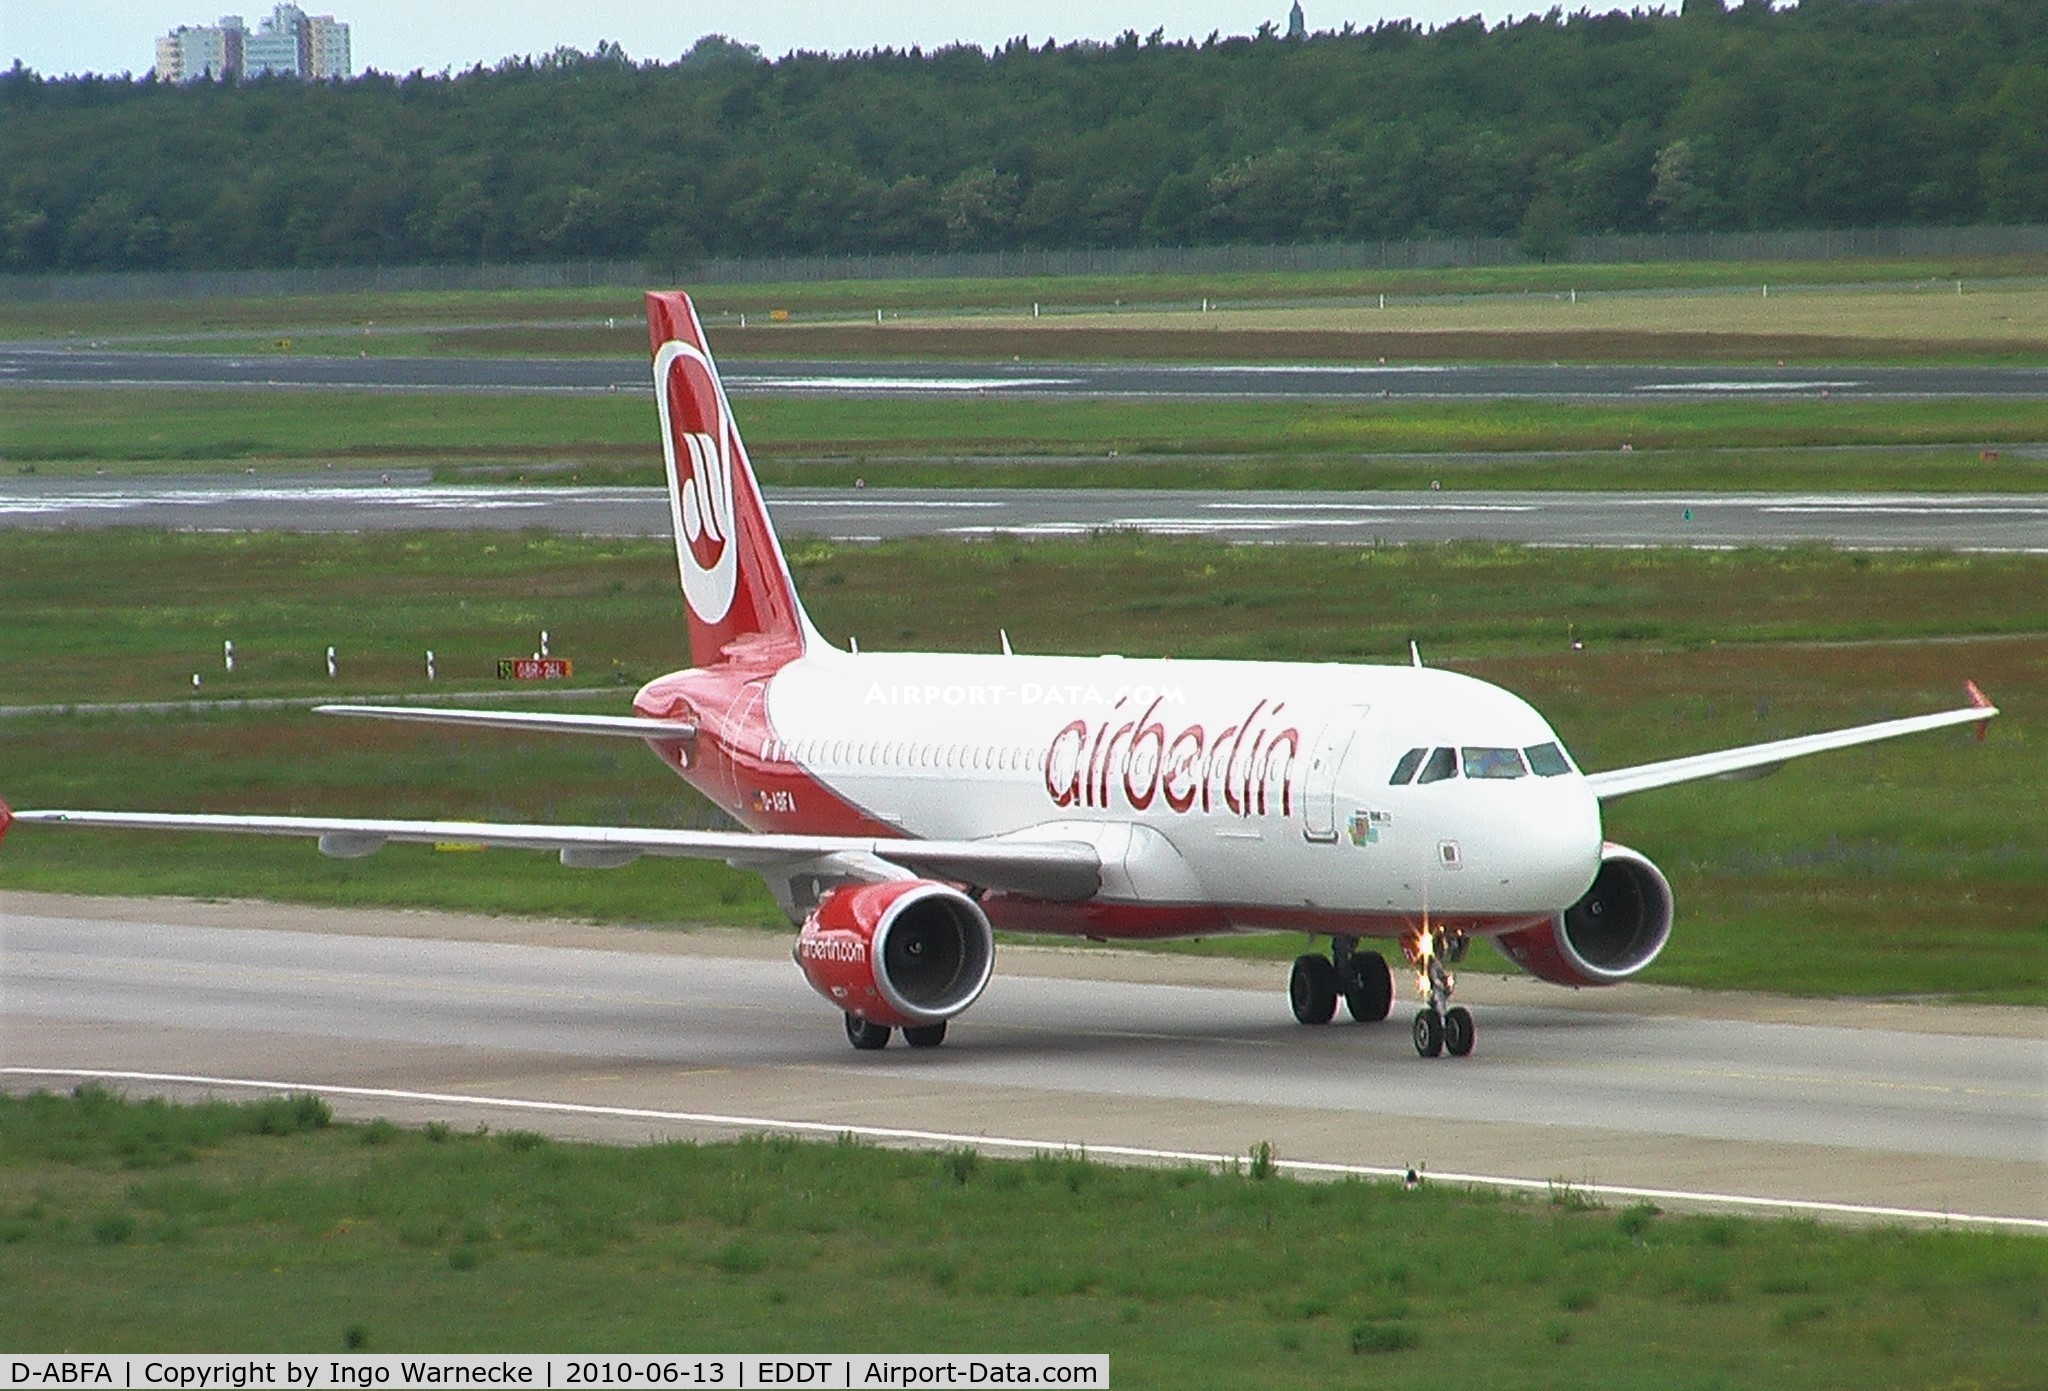 D-ABFA, 2009 Airbus A320-214 C/N 4101, Airbus A320-214 of airberlin at Berlin/Tegel airport